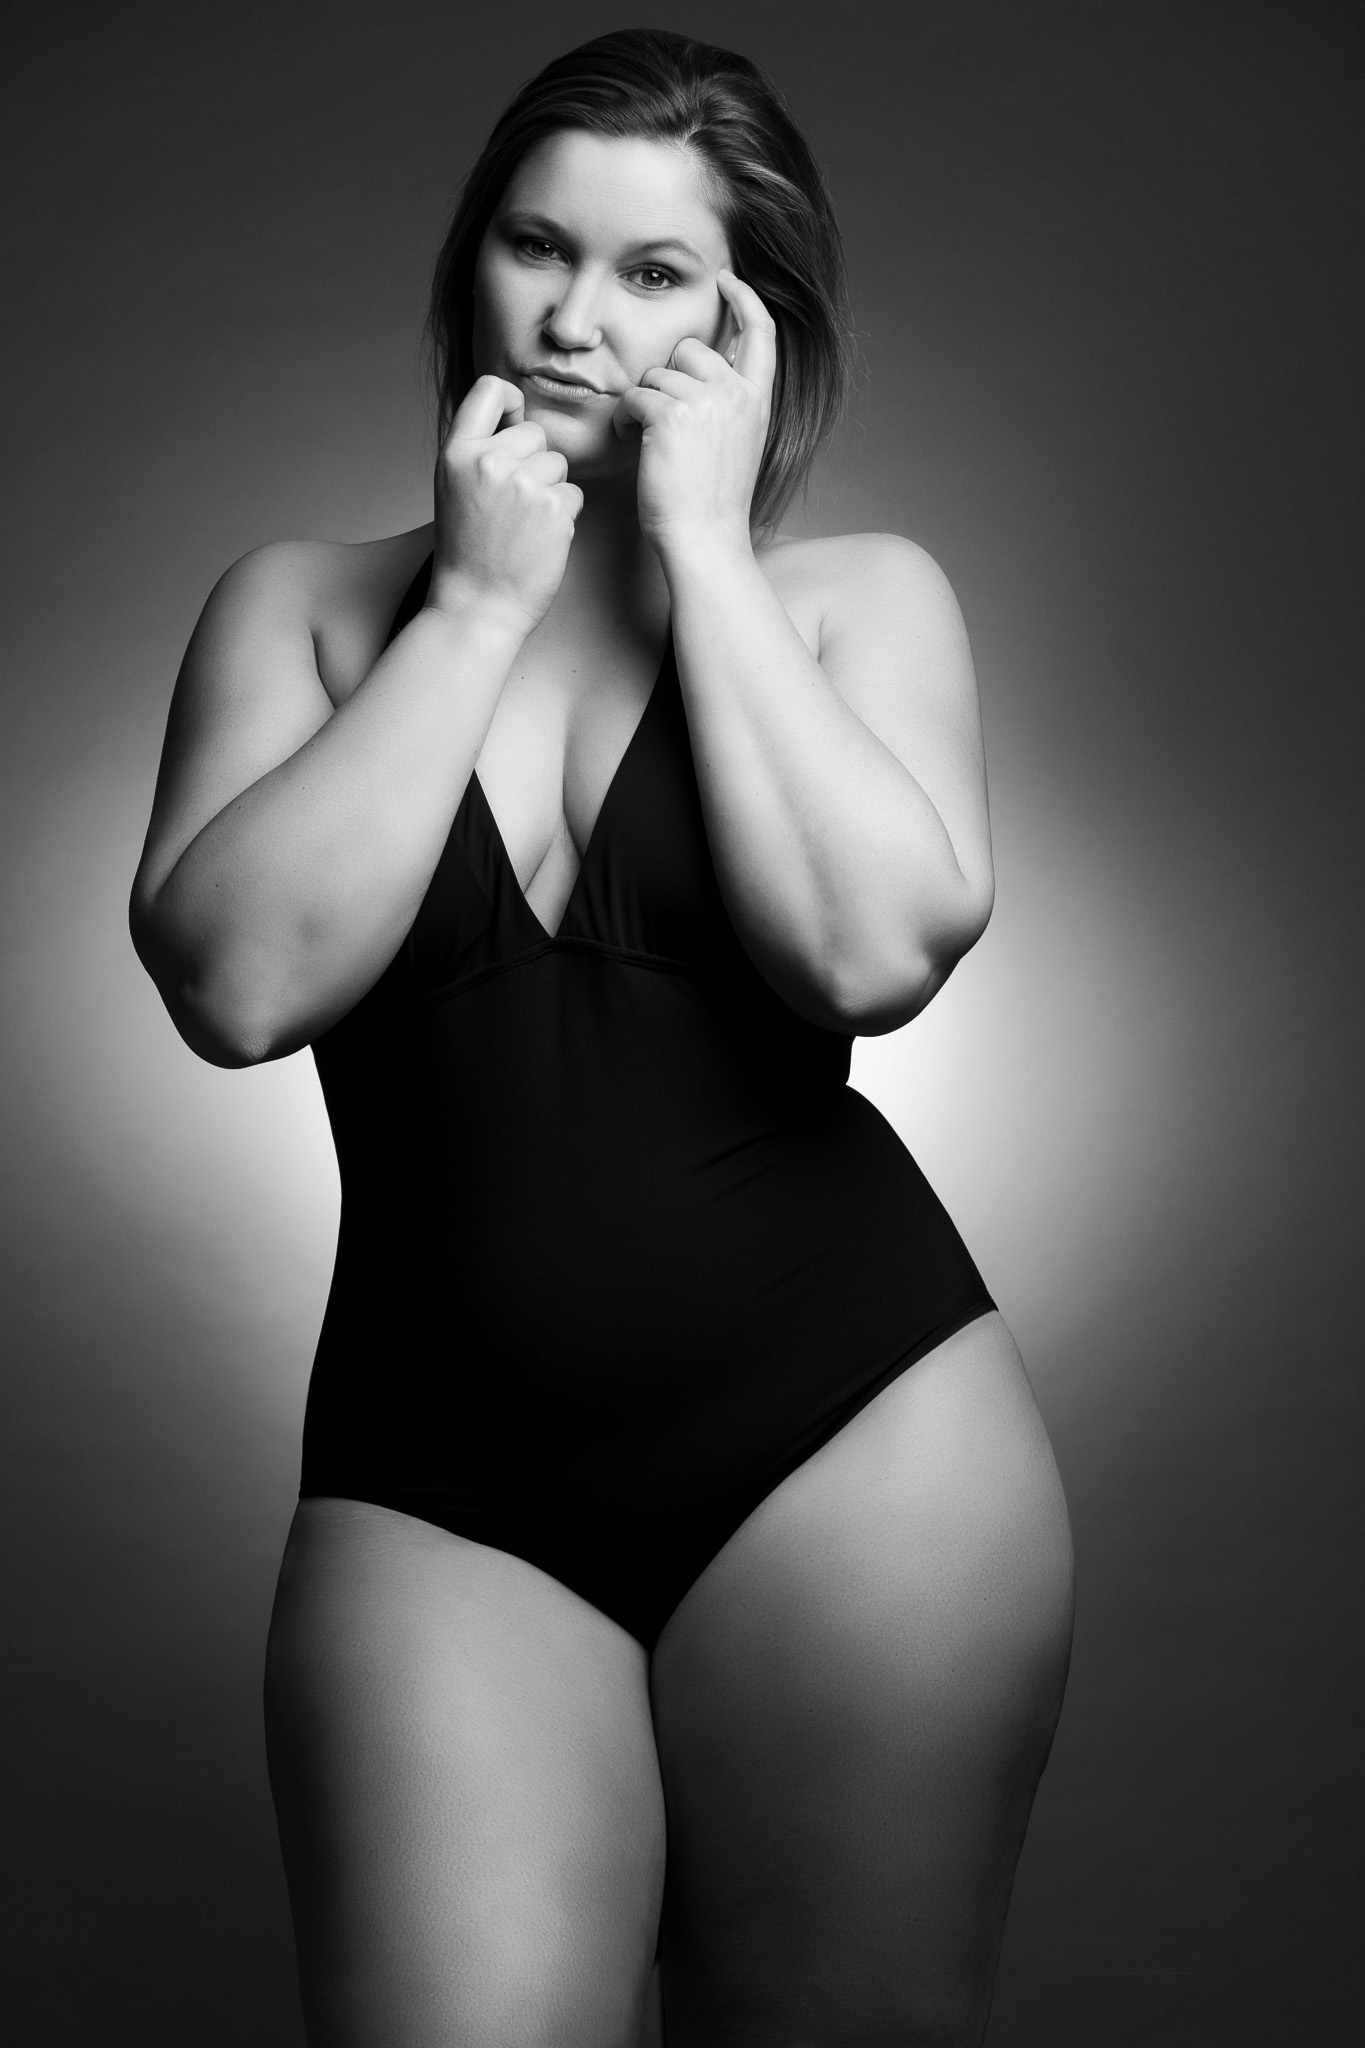 Annelies Shows of her Curves in Black & White